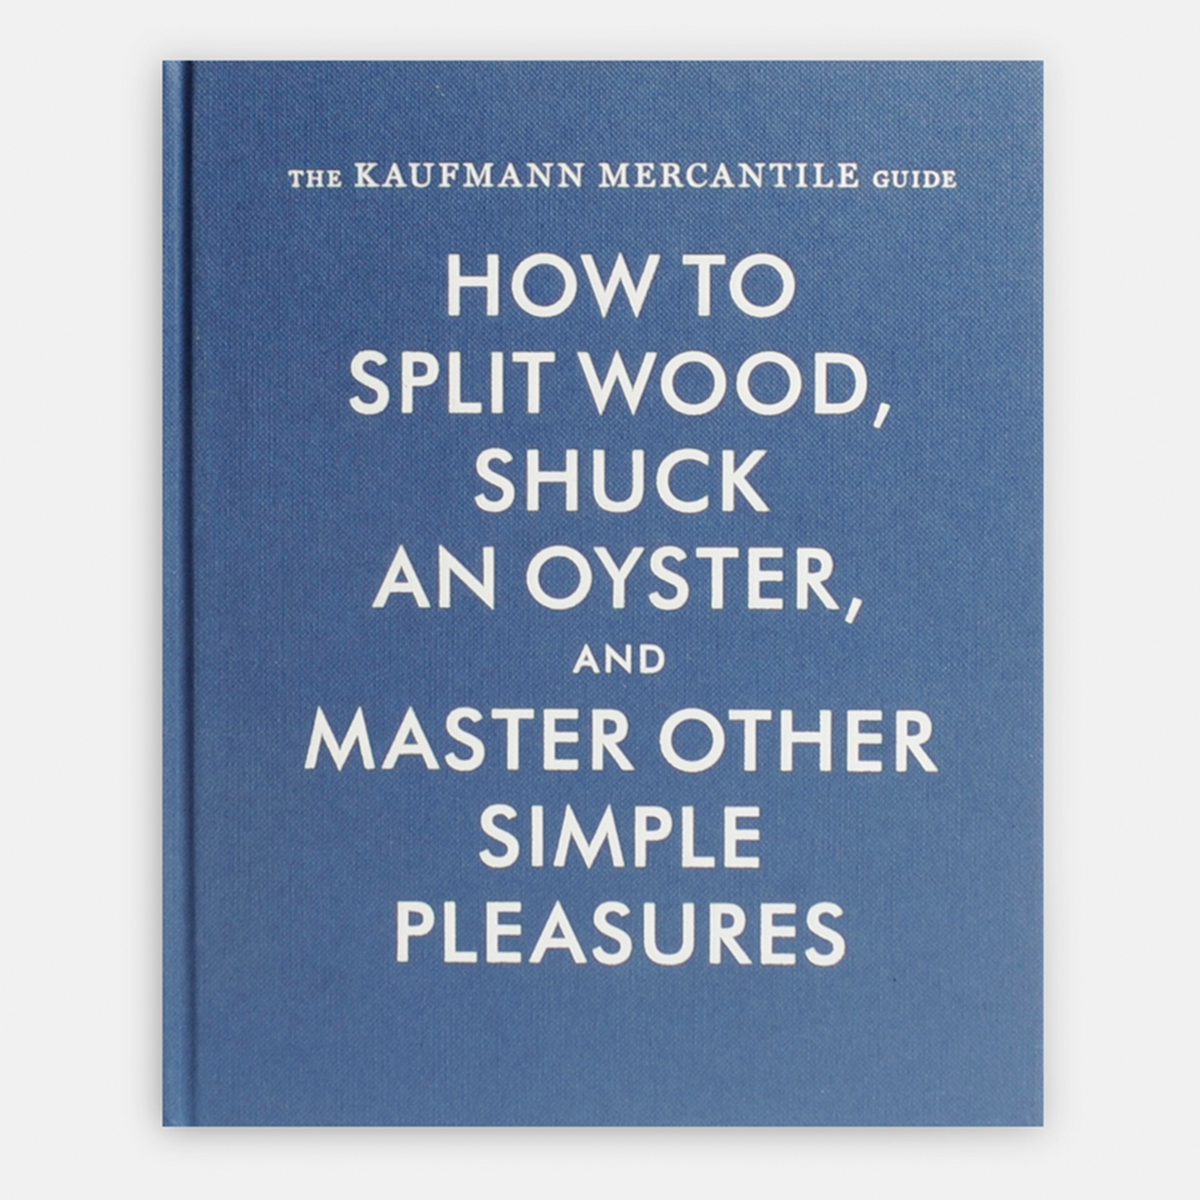 How to Split Wood, Shuck Oysters and Master Other Simple Pleasures